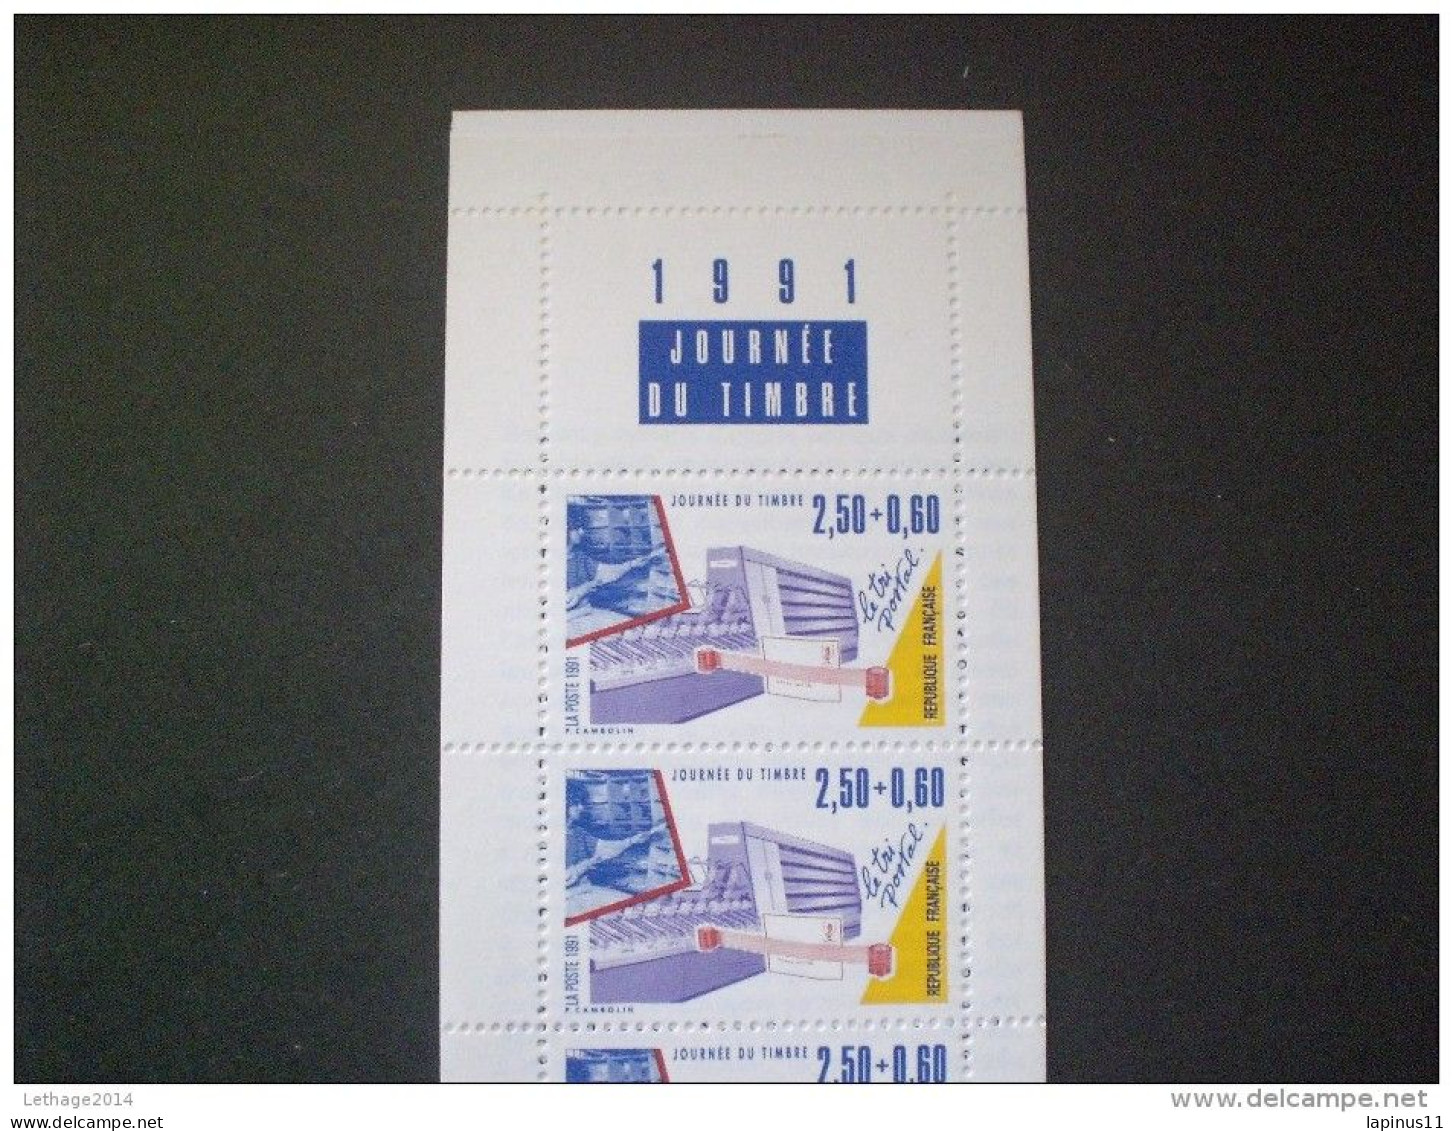 STAMPS FRANCE CARNETS 1991 The Day Of Stamps - People